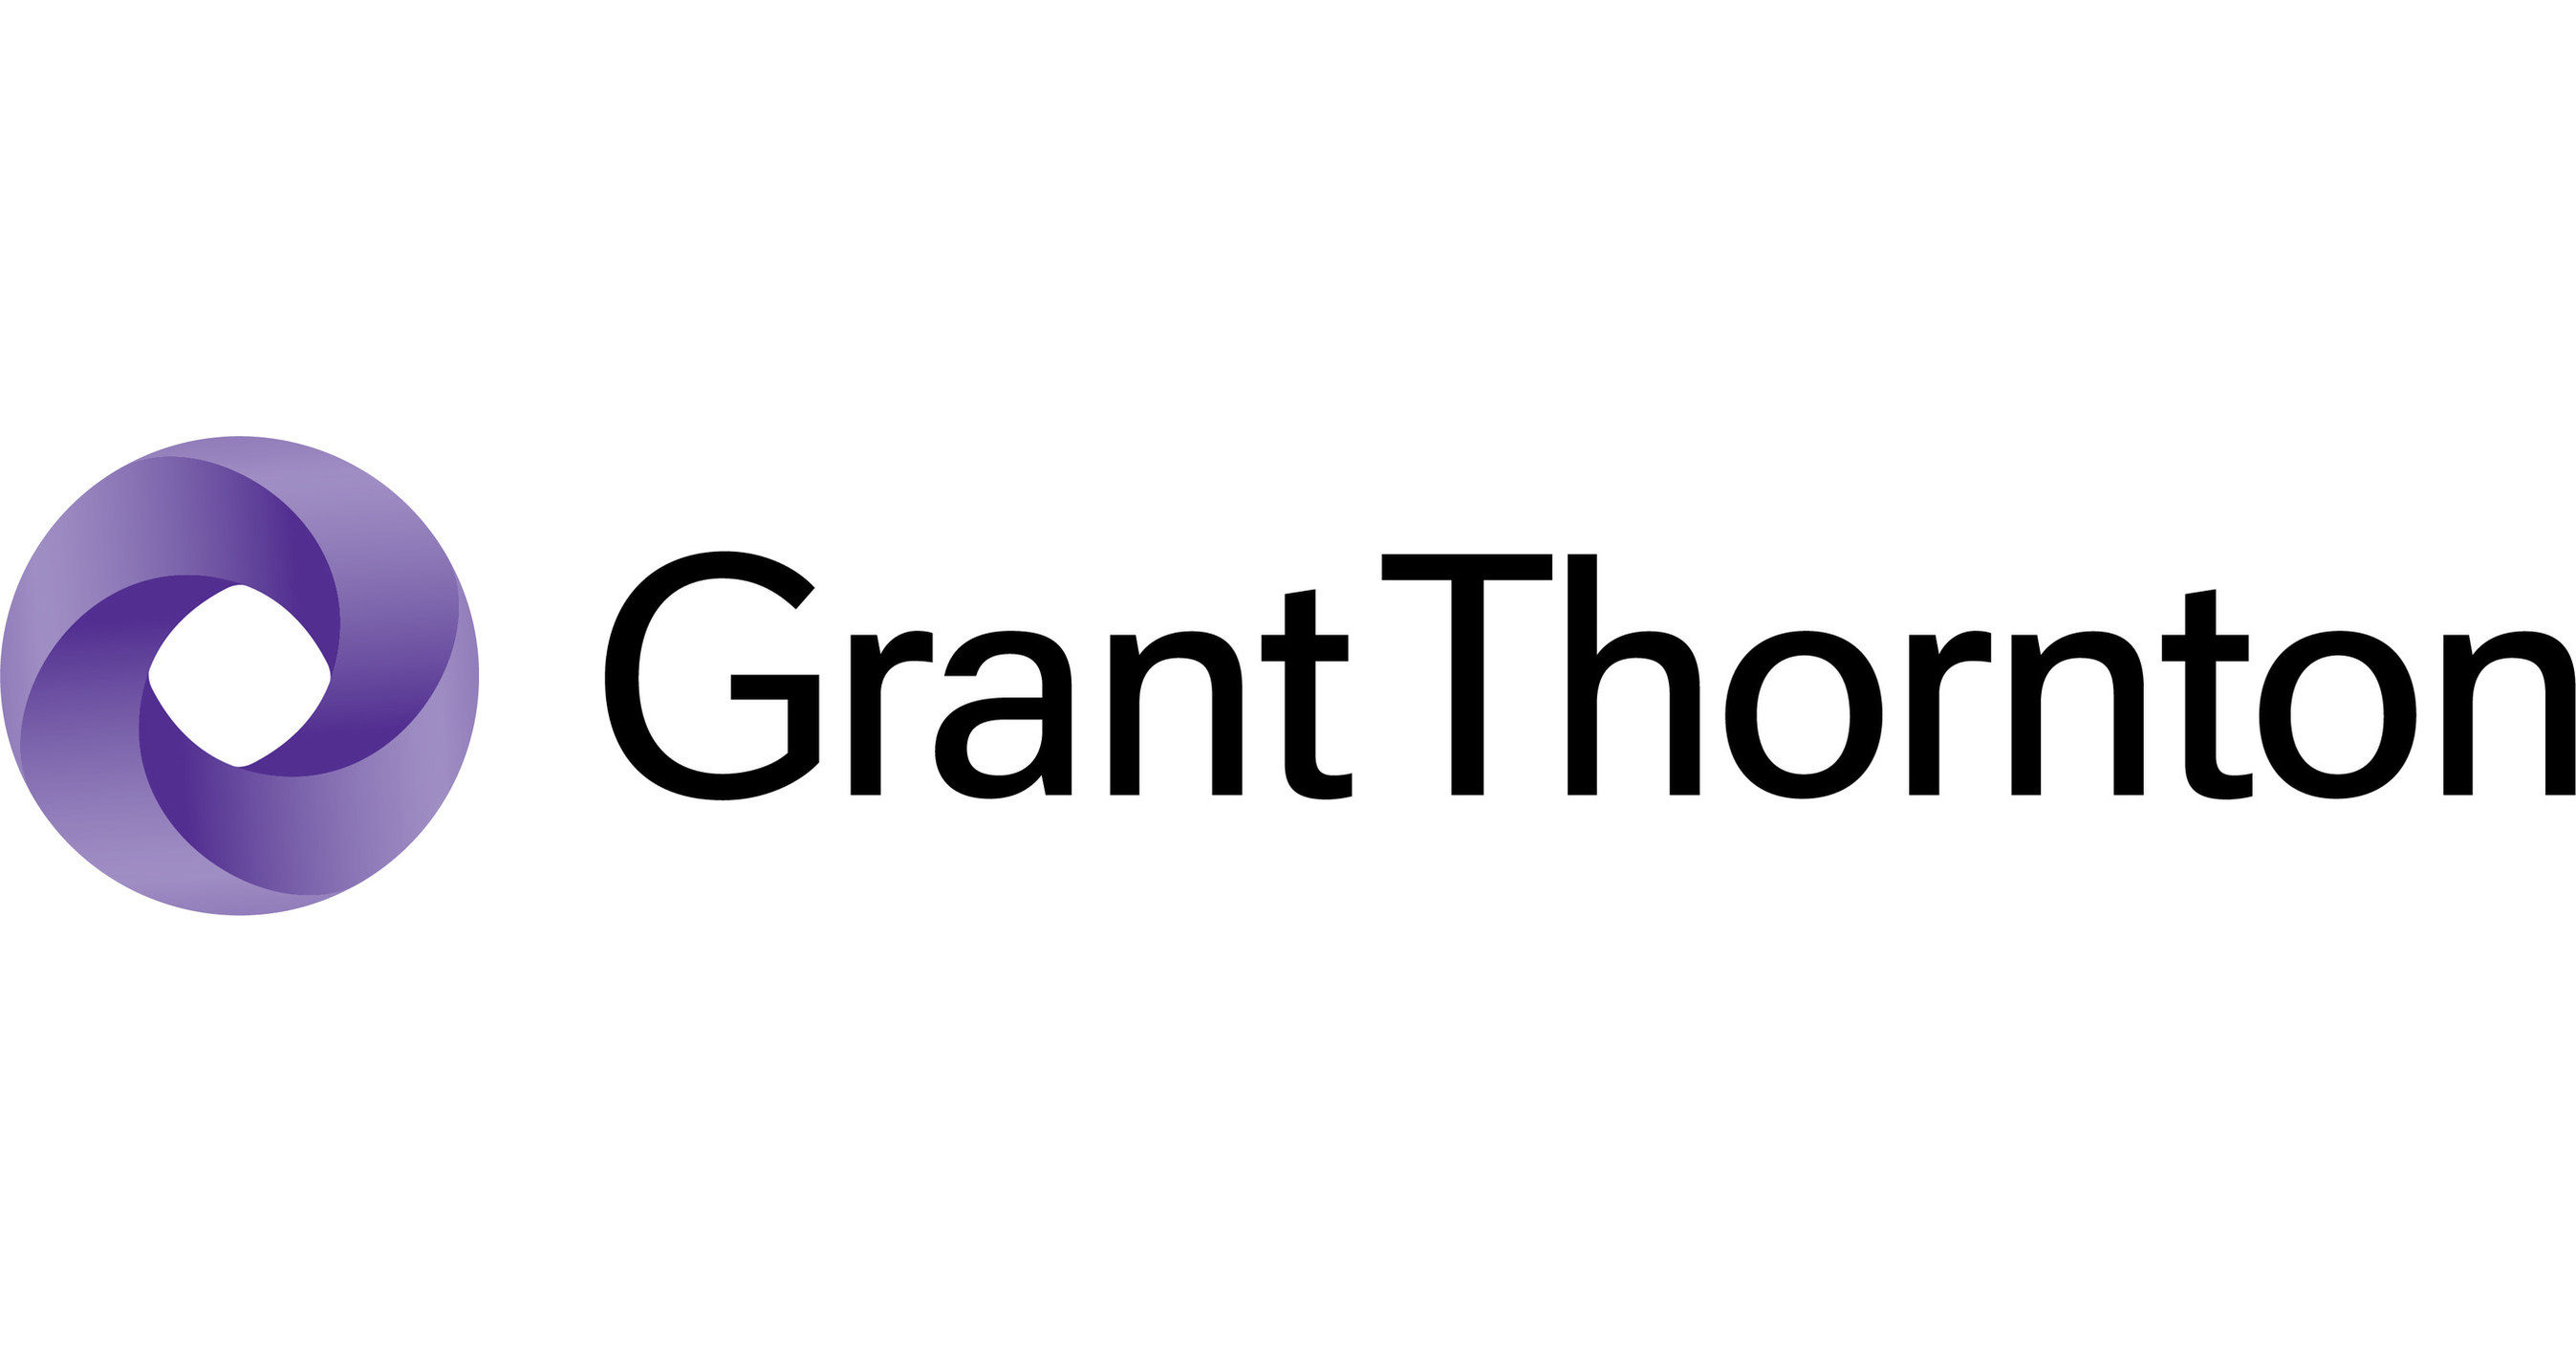 Grant Thornton LLP helps businesses thrive in turbulent times